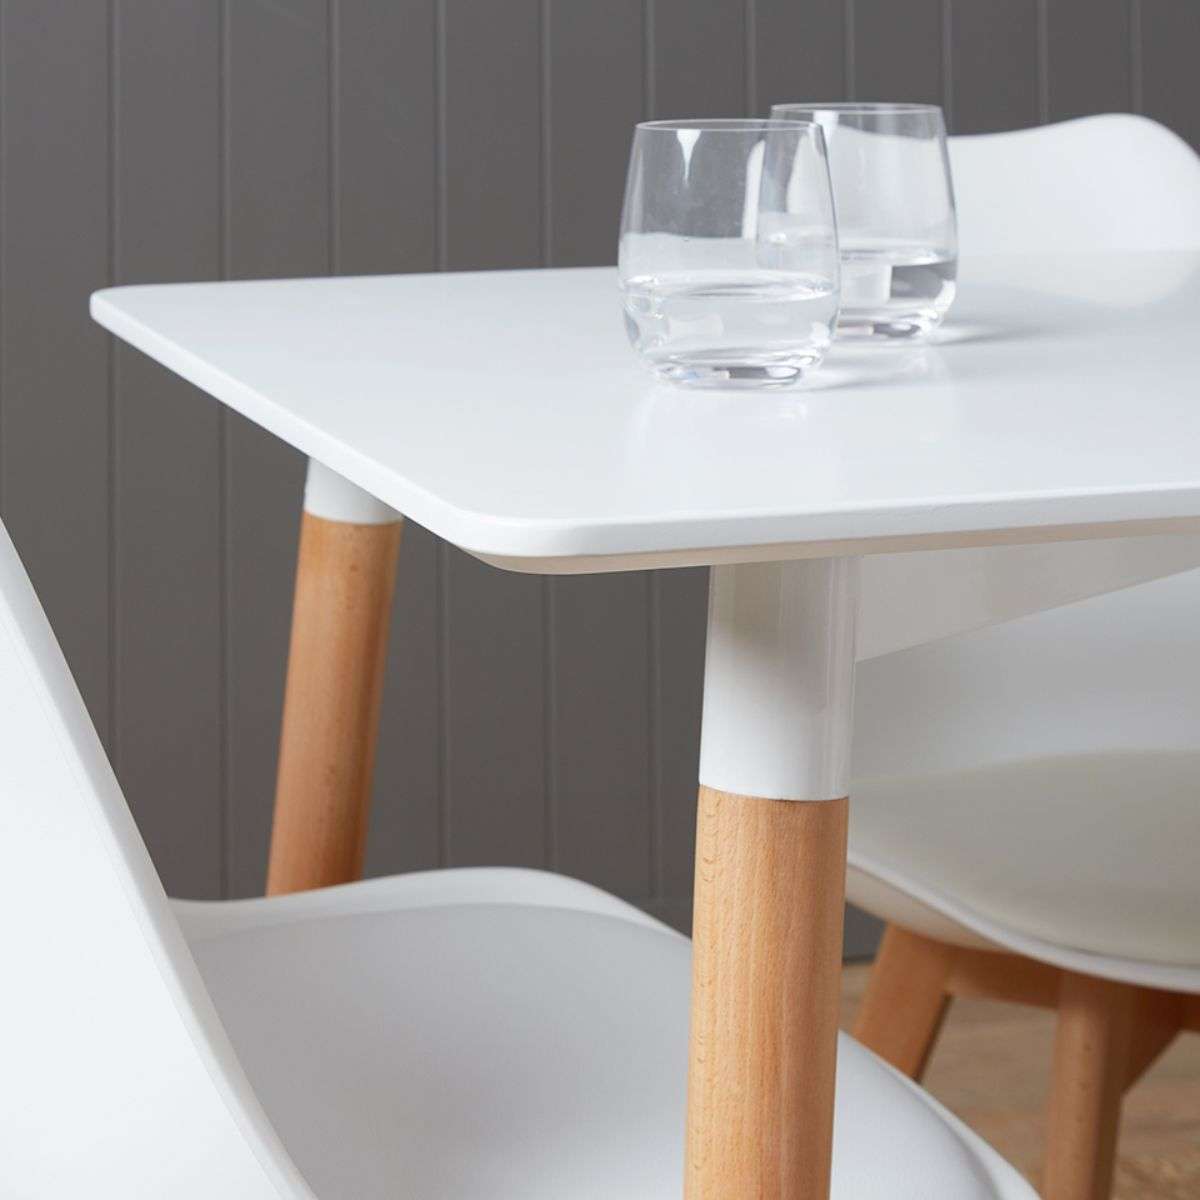 Contemporary 4 Seater Dining Table - White